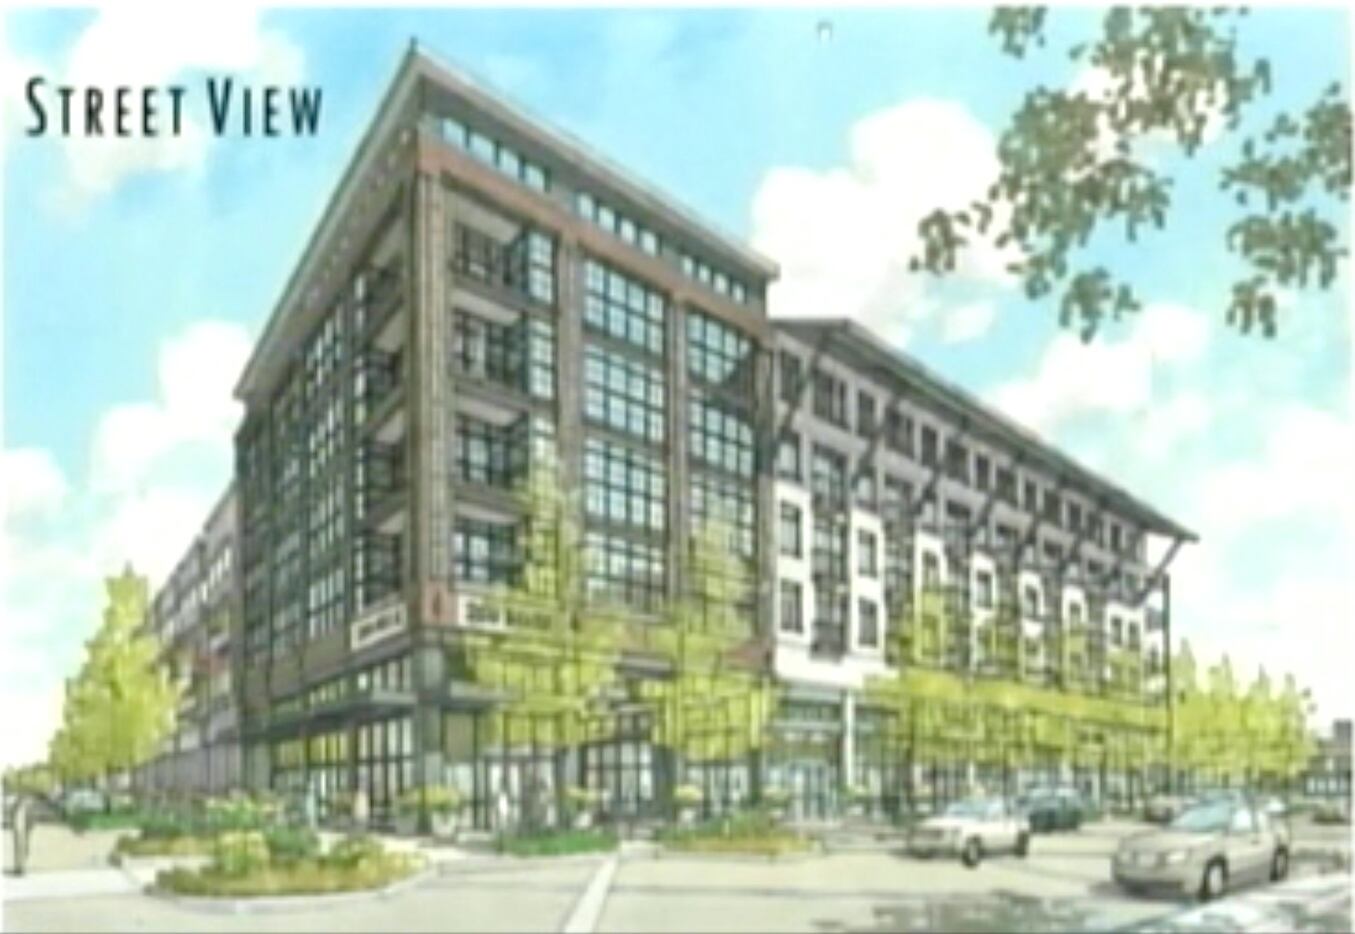 The planned Town Central project includes retail, apartments and townhomes.